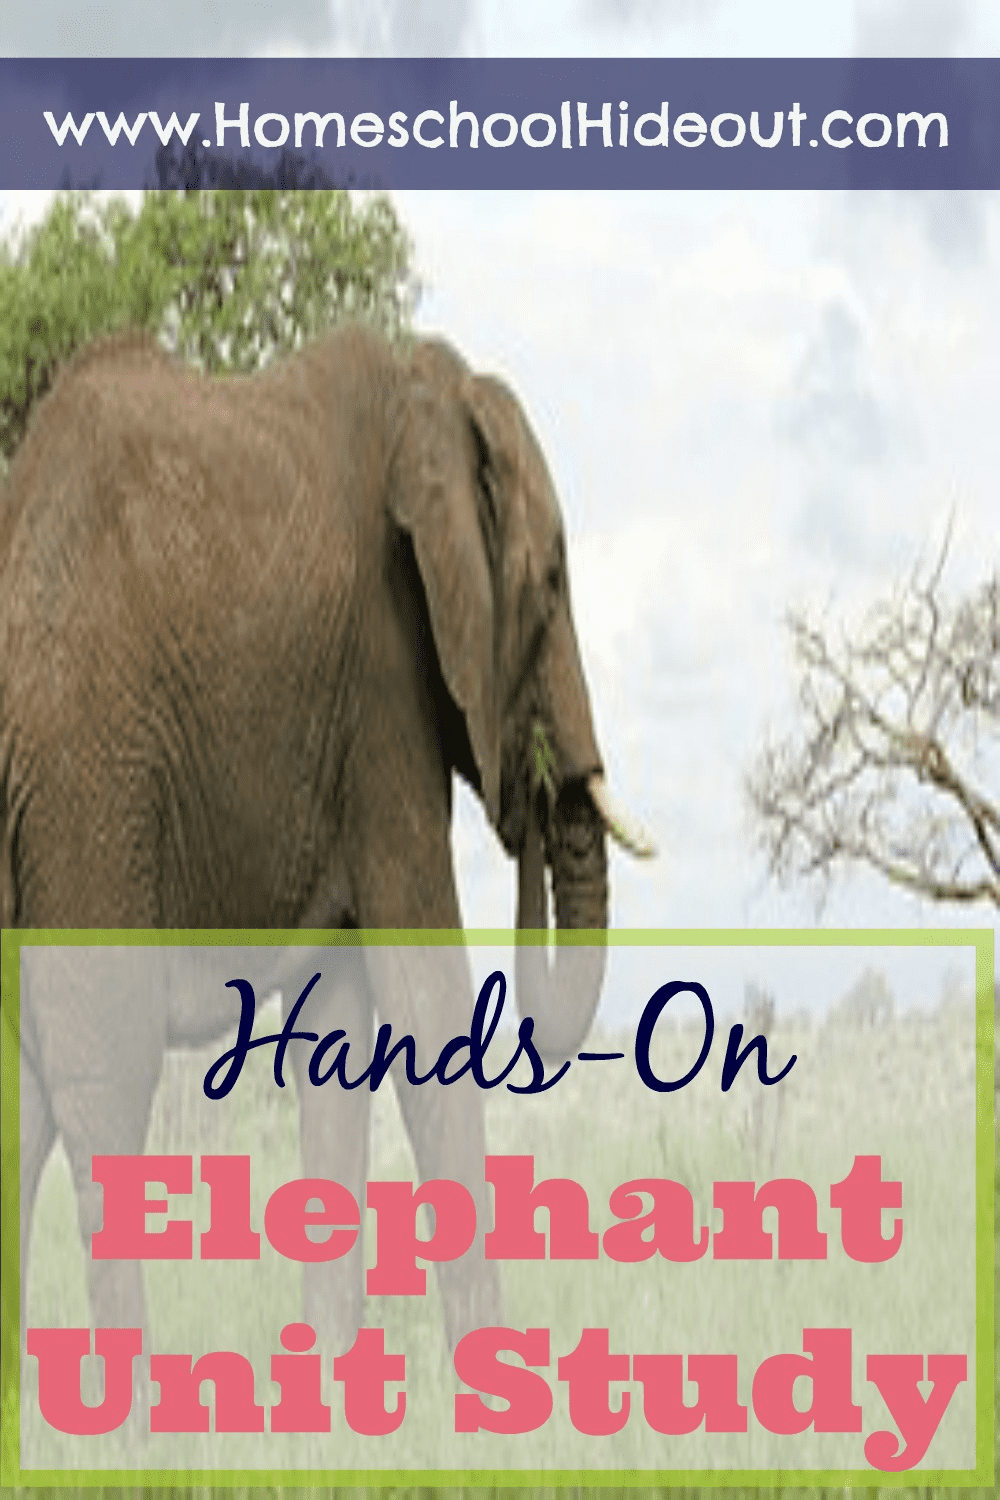 What fun! An elephant unit study that has EVERYTHING I need. Books, games, crafts, fun facts...the whole shebang.